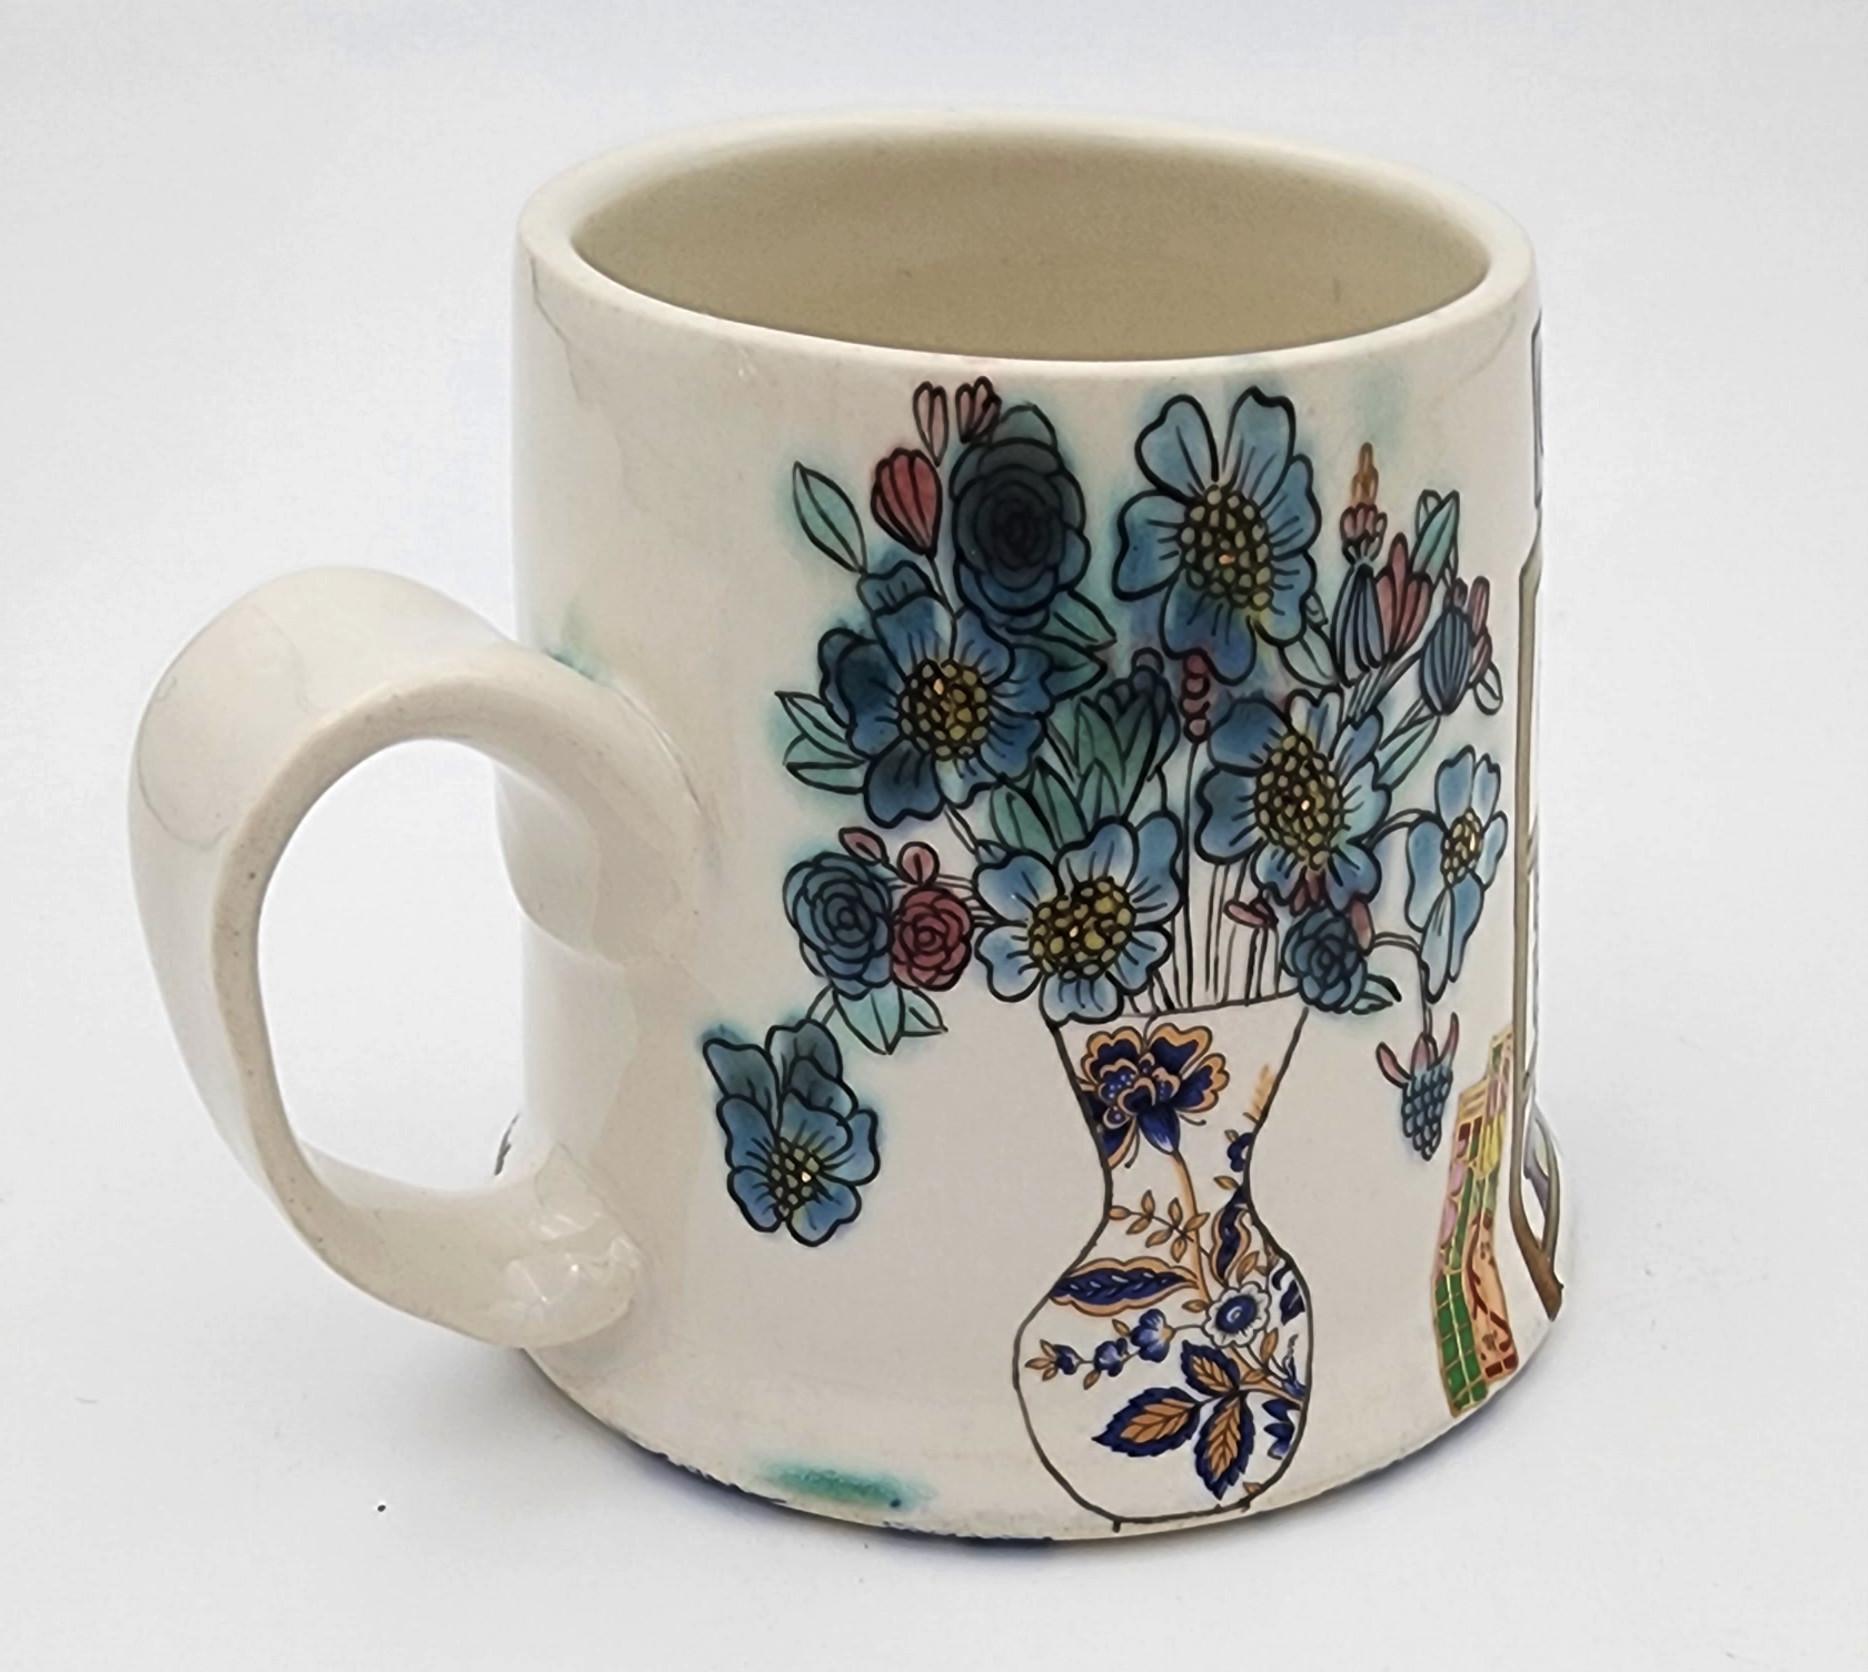 Melanie Sherman
Cup with Interior II (Hand-Painted, Gold Luster, Stereo, Chair, Flowers)
Porcelaneous Stoneware, Underglaze, Glaze, Porcelain Paint, Hand-made Vintage Decals, Gold Luster, Platinum Luster
Year: 2023
Size: 3.25x4.5x3.75in
Signed by